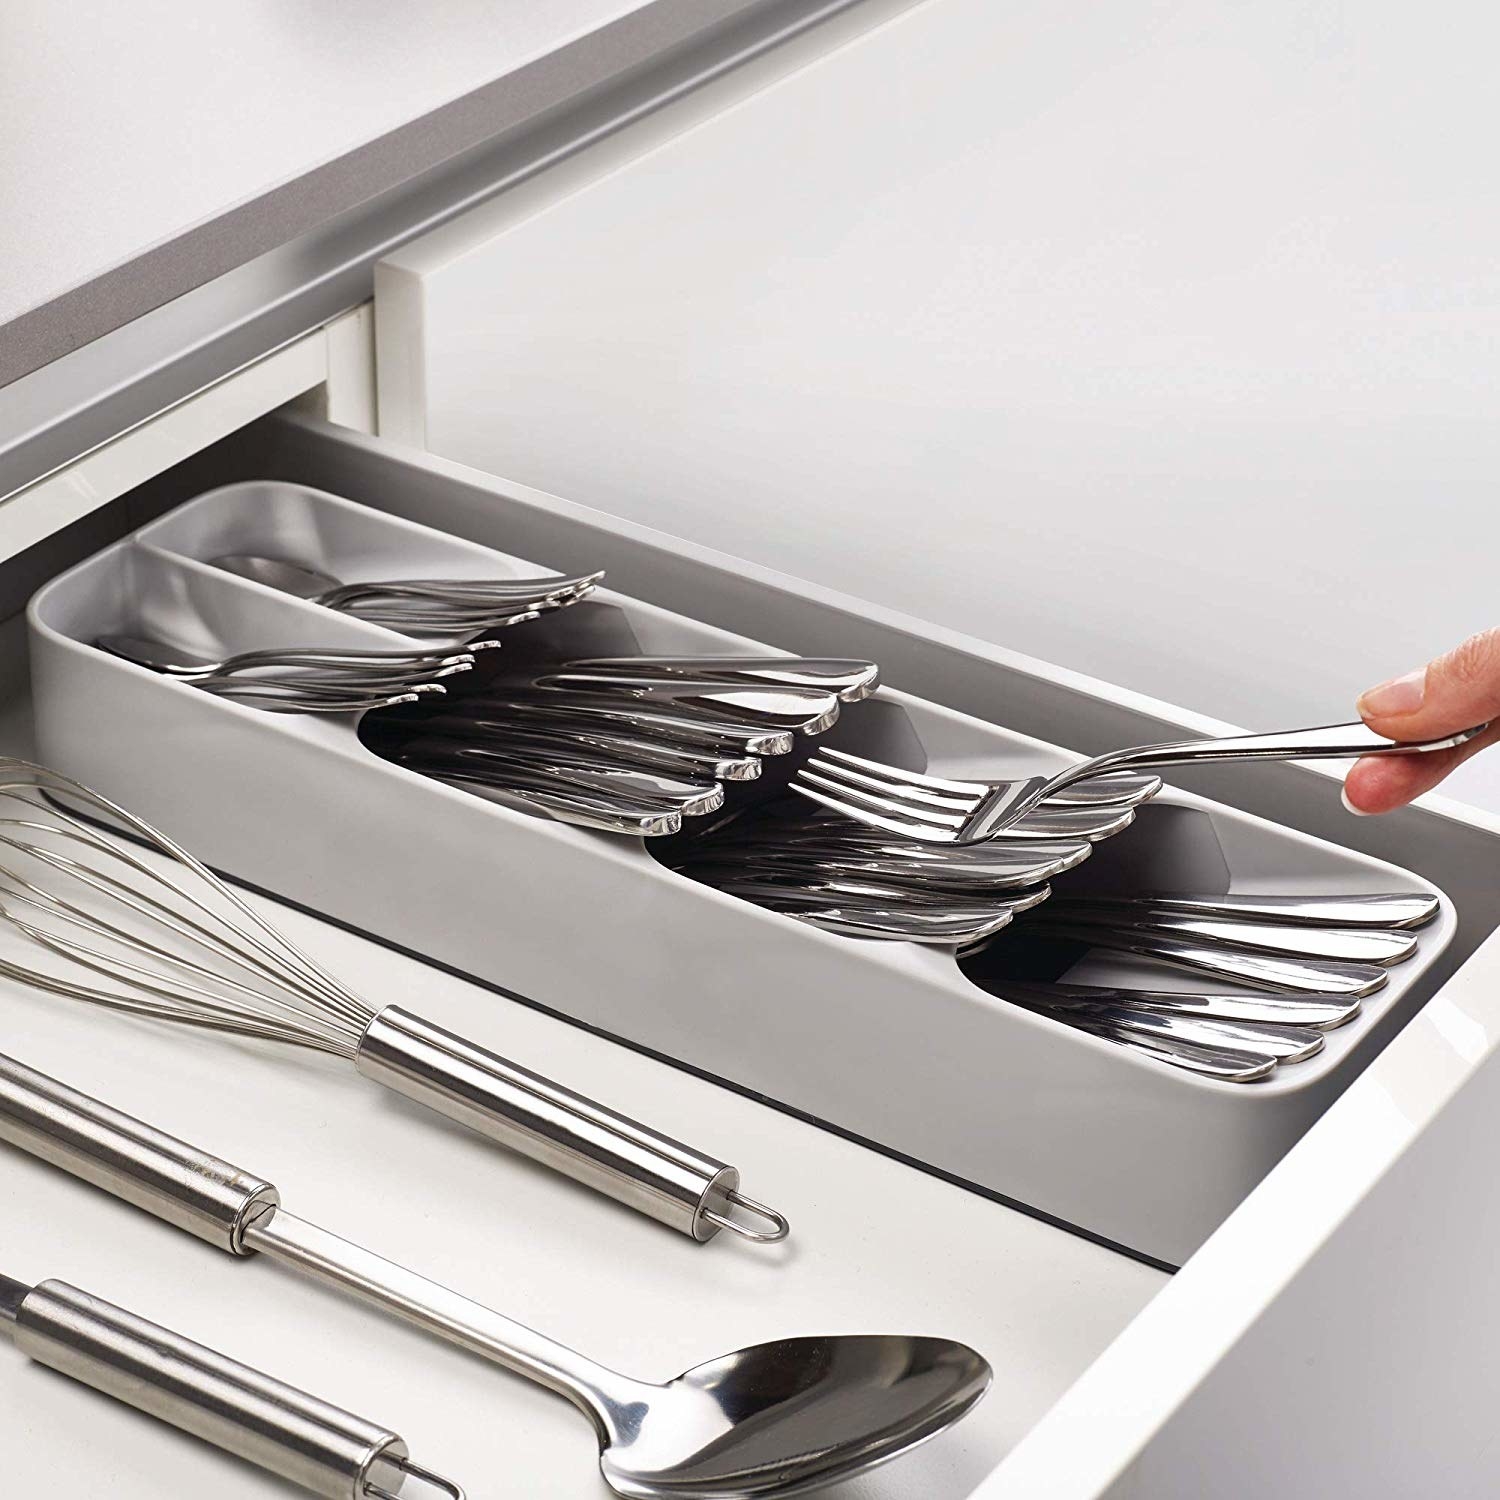 A person putting a fork into a multi-tiered utensil organizer There are four slots